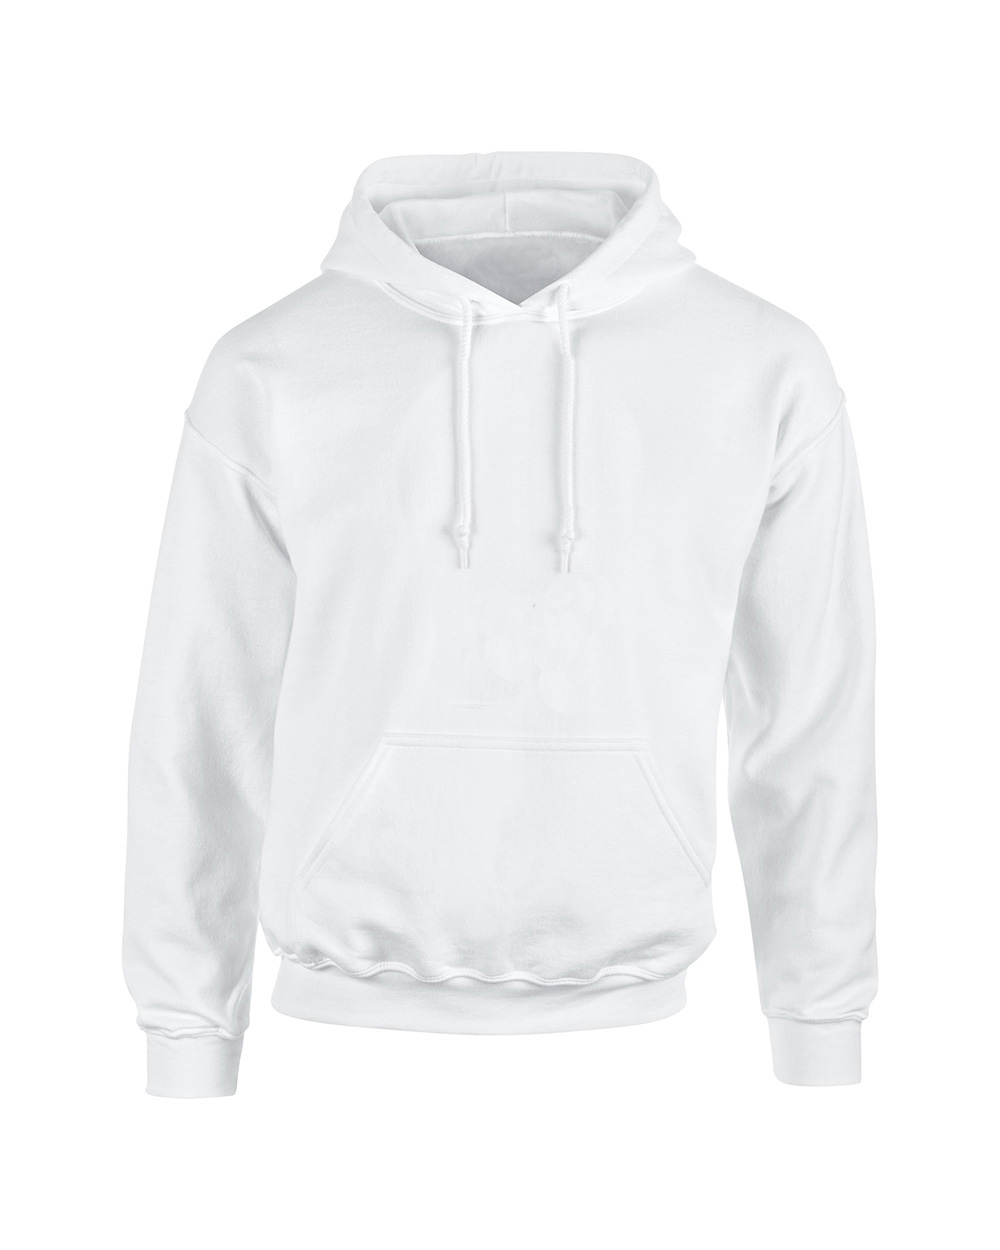 List 100+ Pictures What To Wear With A White Hoodie Full HD, 2k, 4k